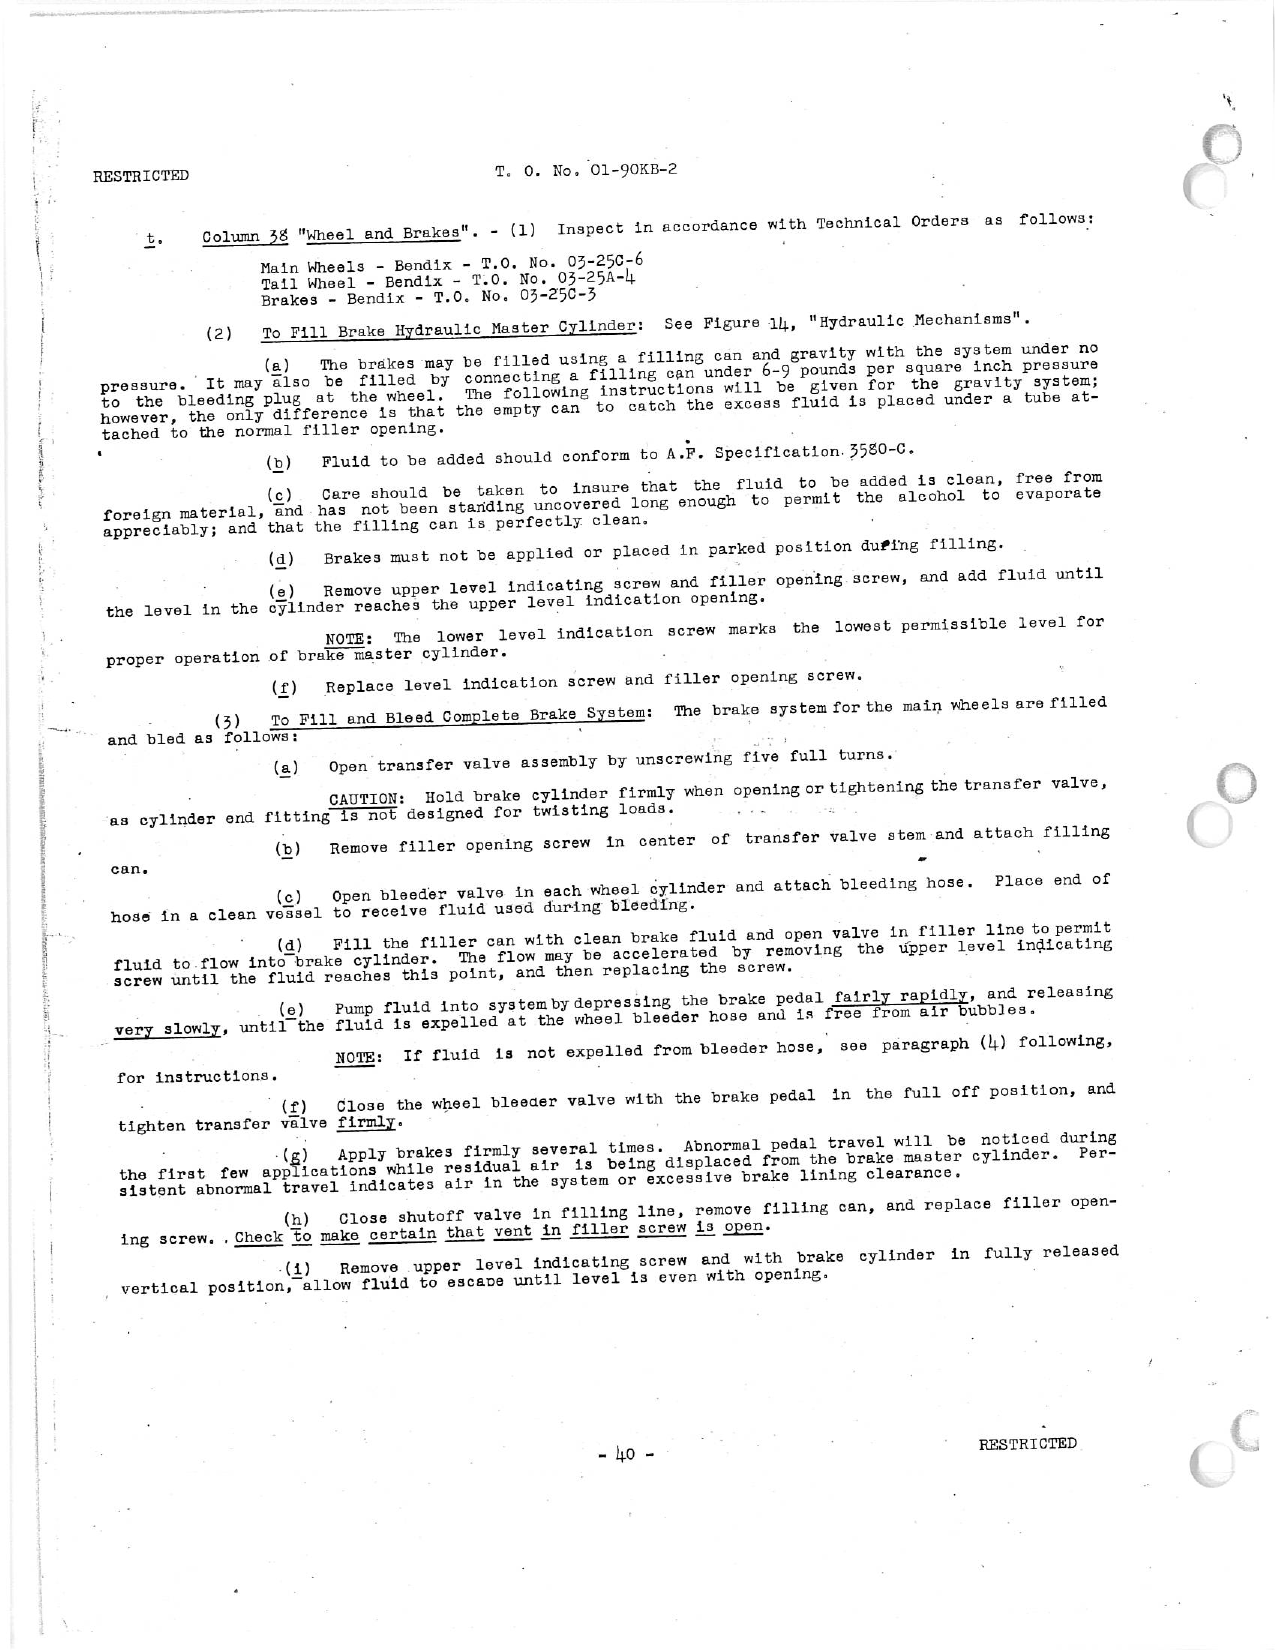 Sample page 220 from AirCorps Library document: Service Instructions - AT-10